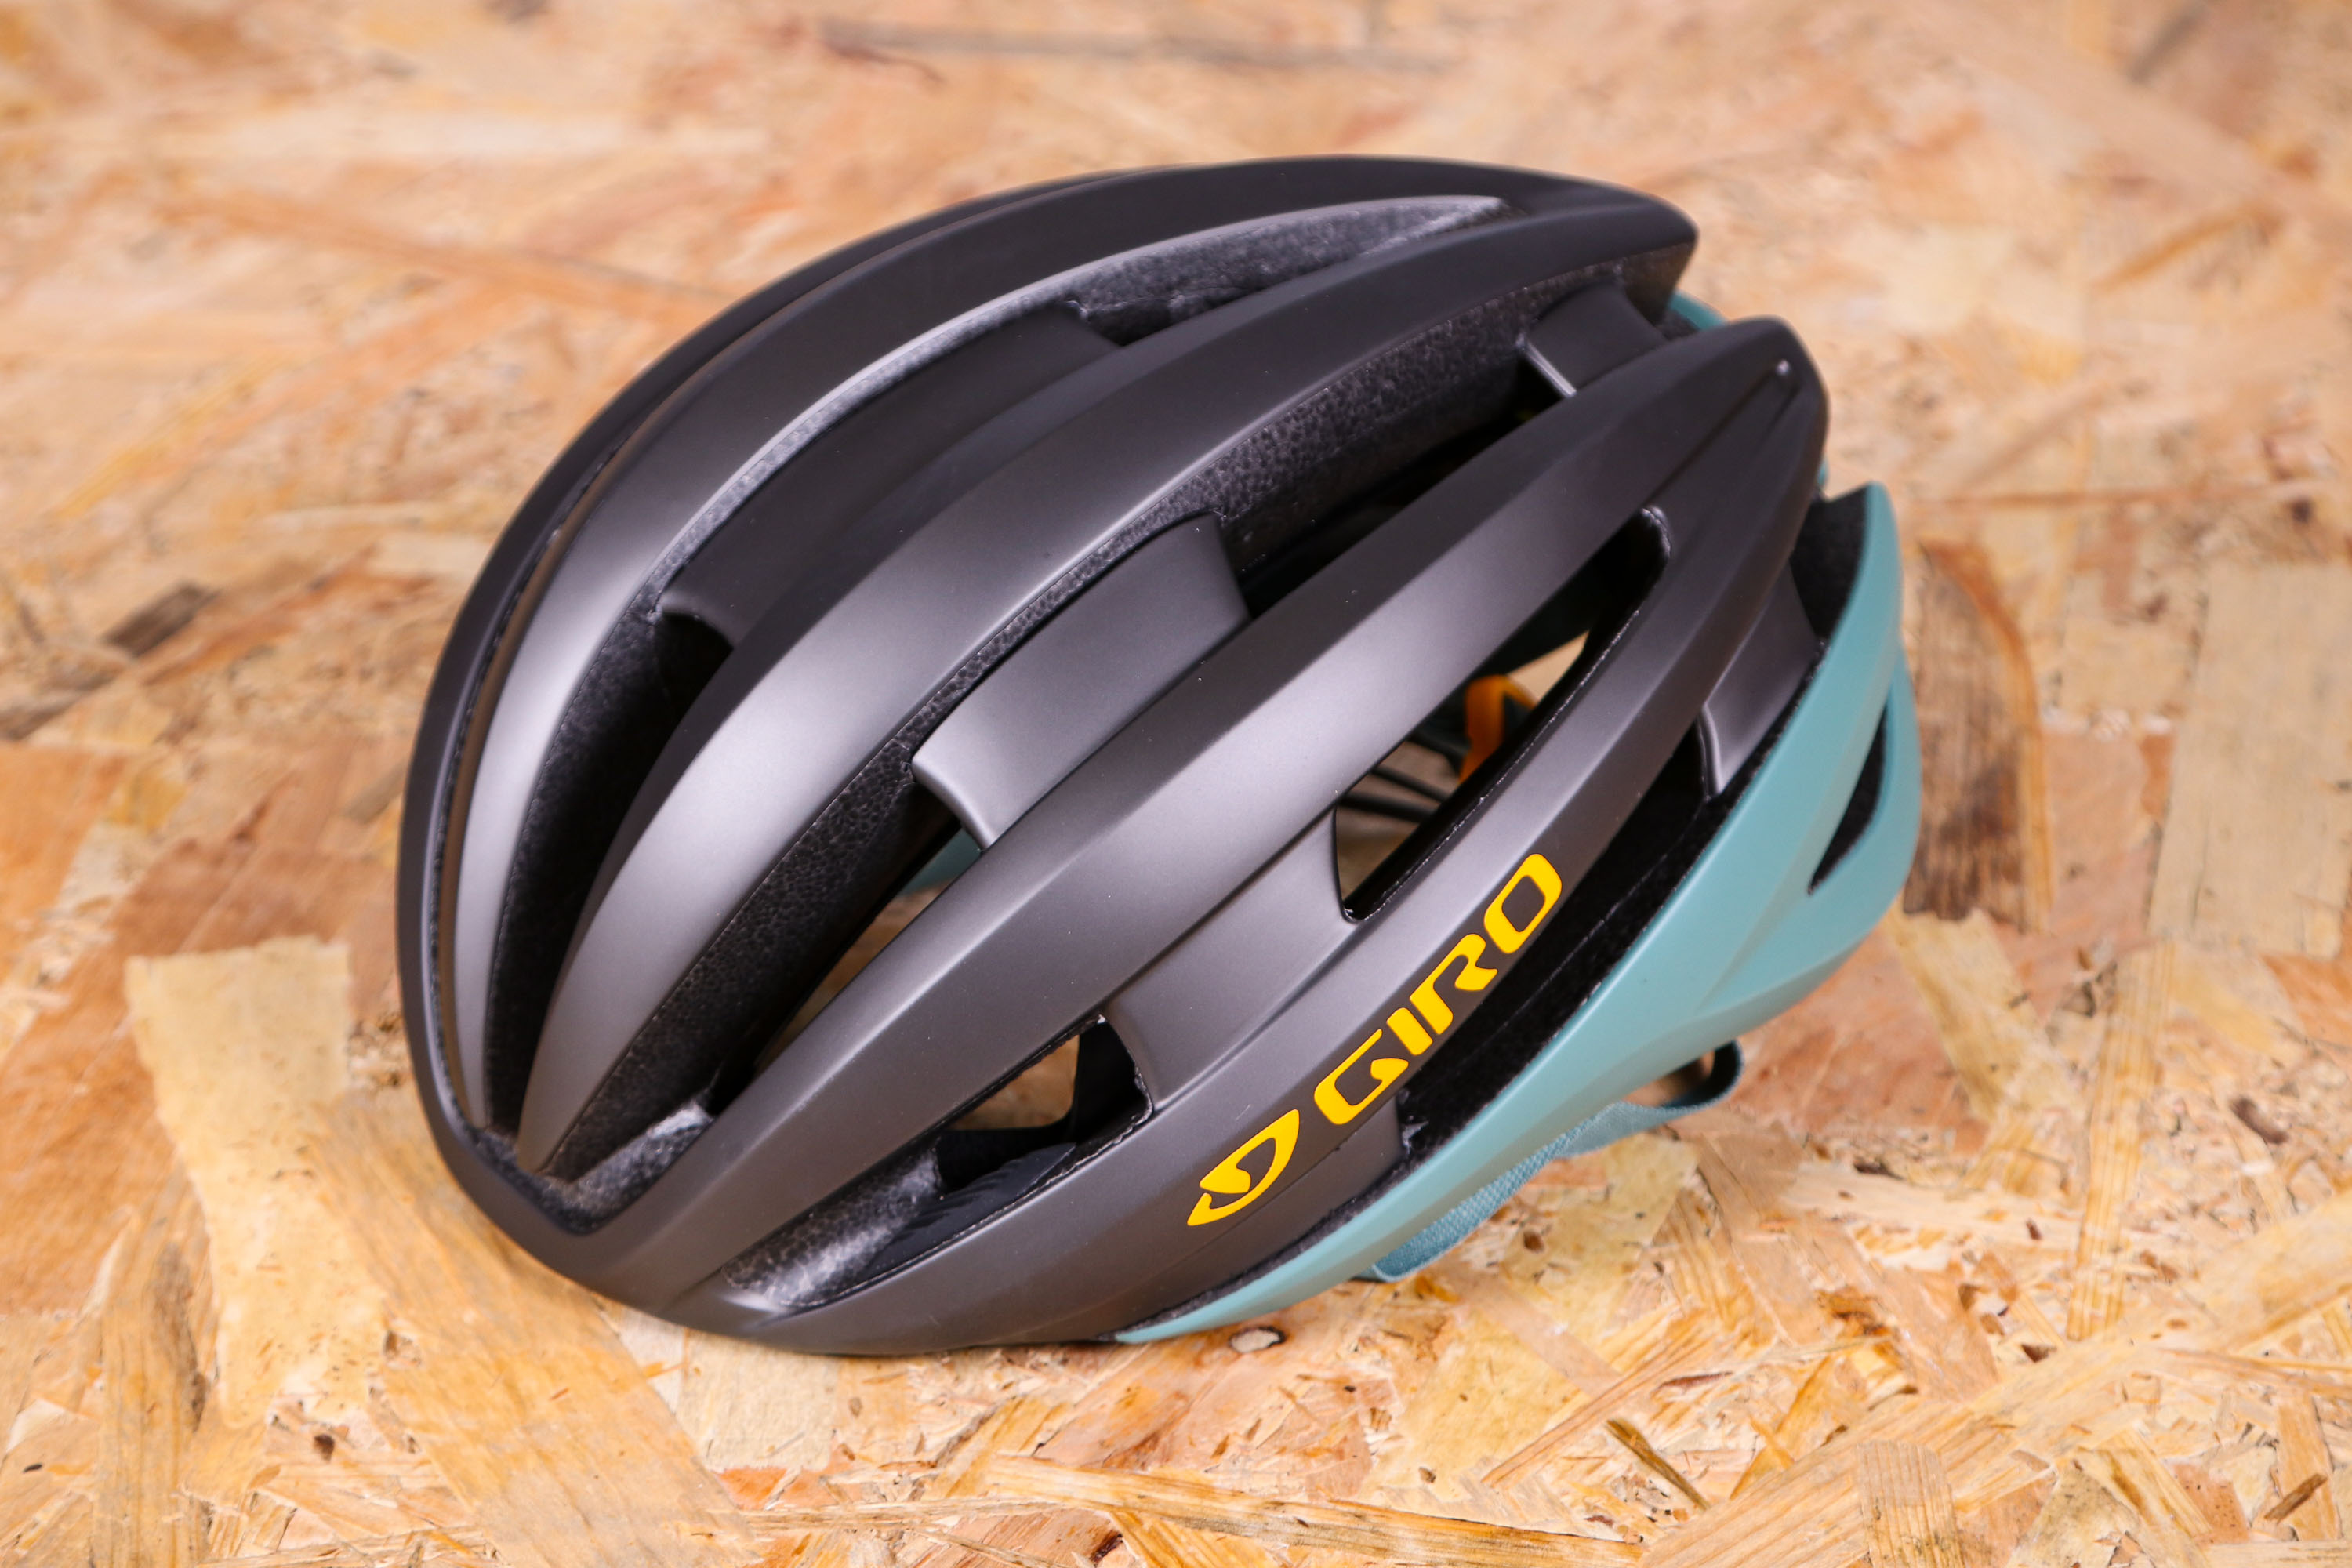 Review: Giro Synthe MIPS Helmet |